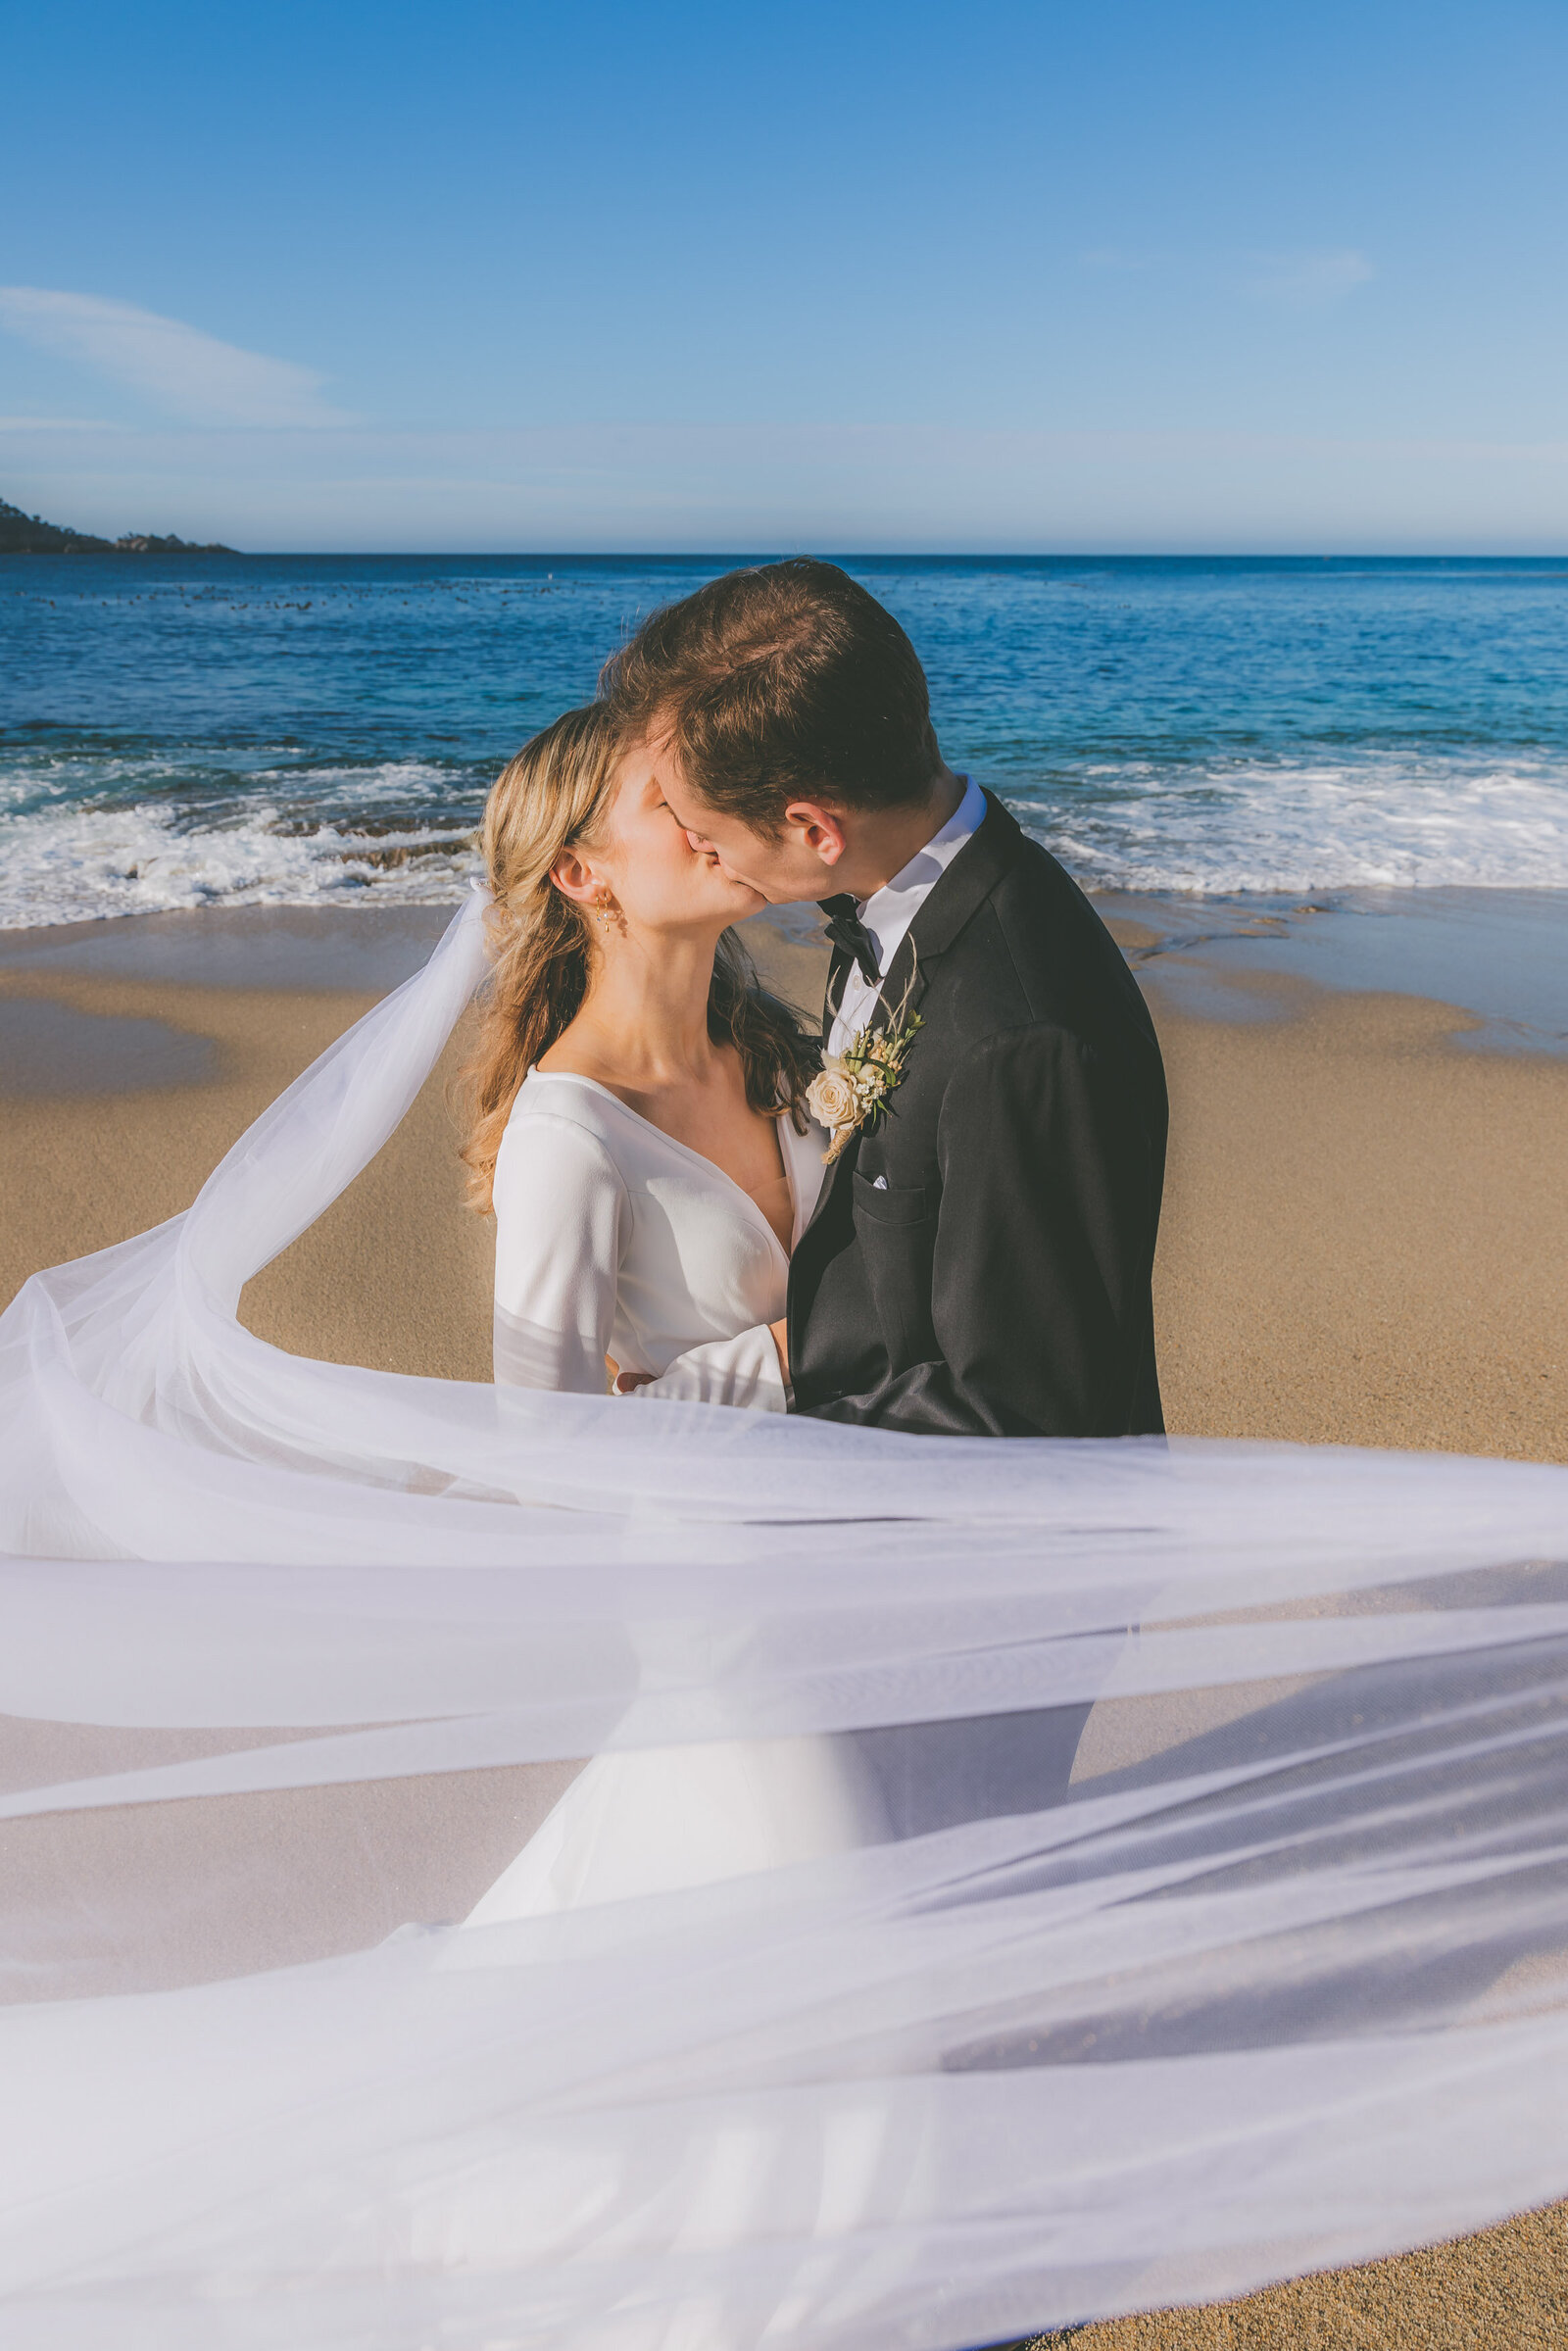 A bride and groom kiss on a beach while her veil is carried in the wind and wraps around the bottom of the photograph.